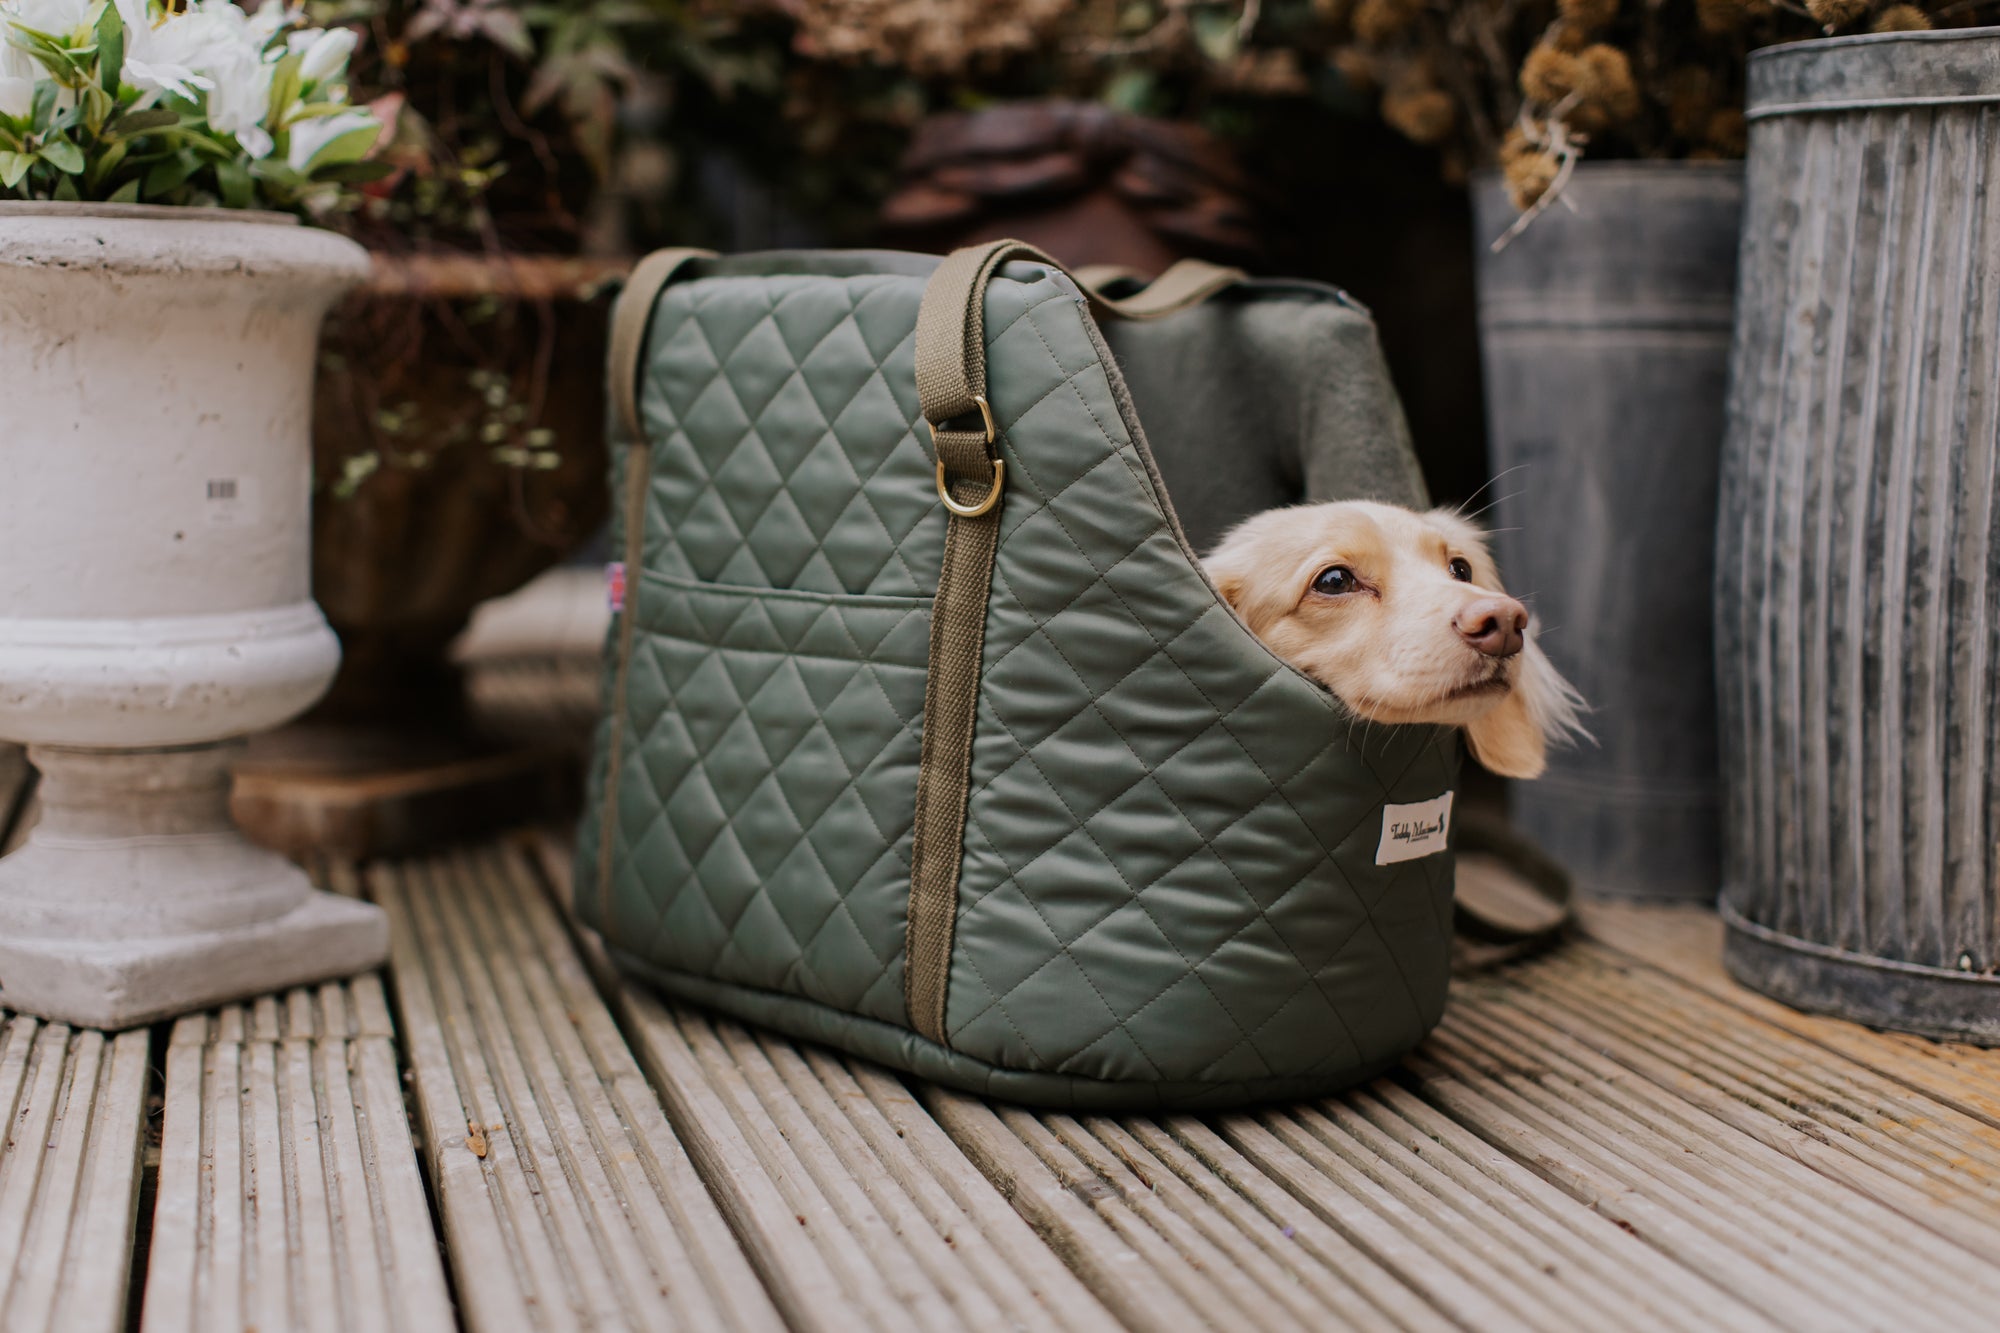 'The Explorer' Luxury Quilted Comfort Dog Carrier by Teddy Maximus featuring waterproof fabric & adjustable straps. Ideal for puppies and small dogs. 